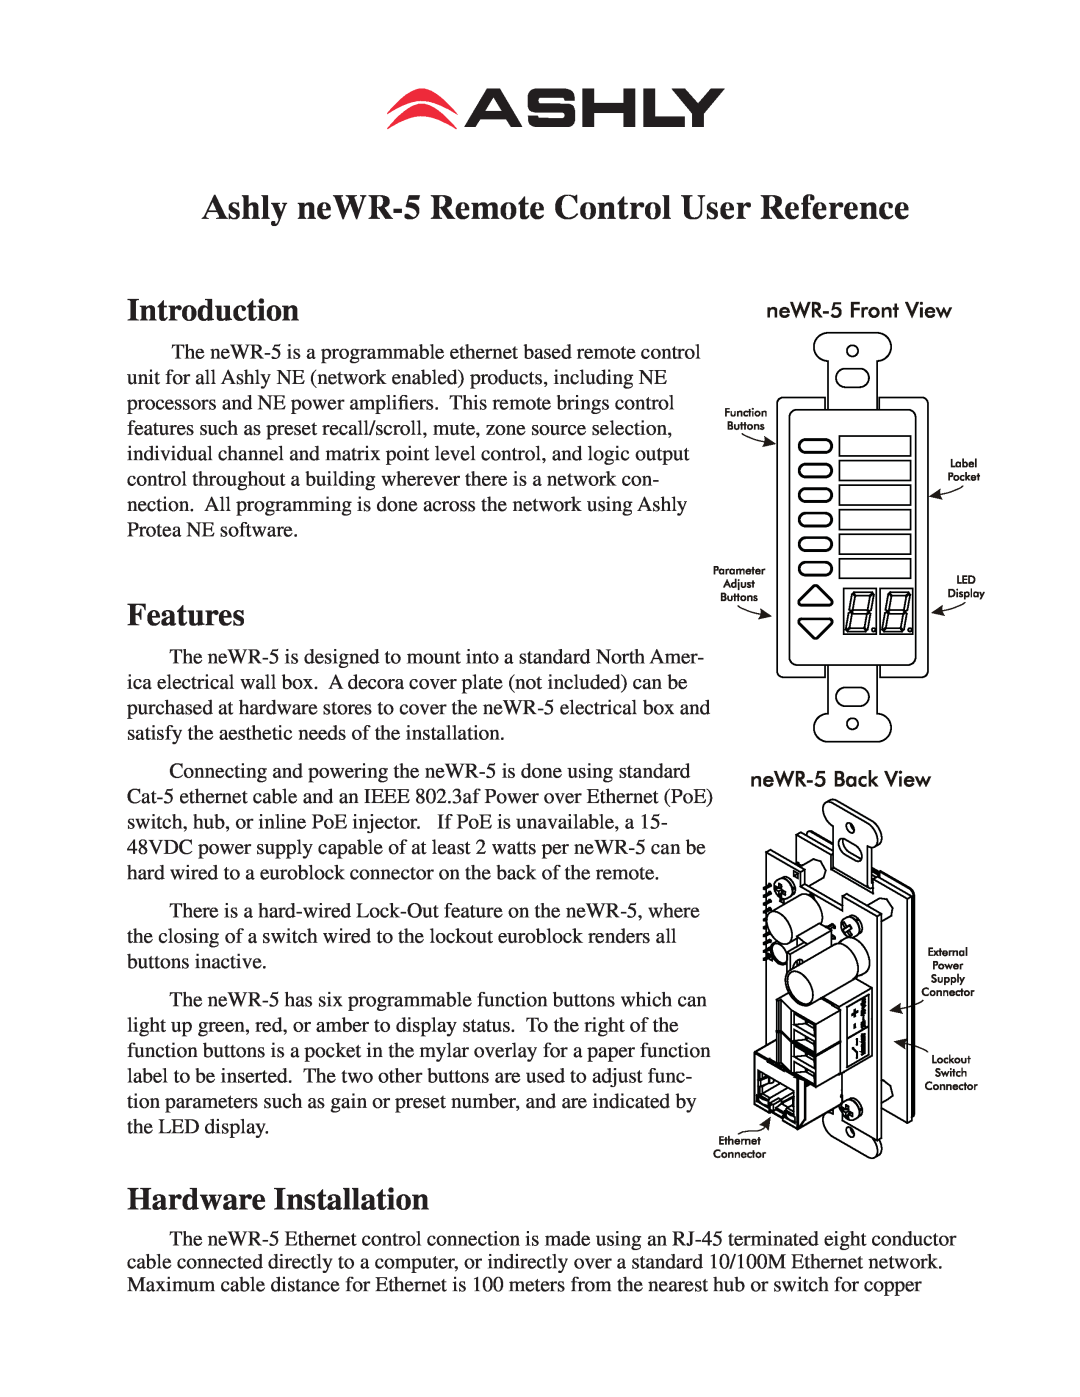 Ashly NEWR-5 manual Introduction, Features, Hardware Installation, Ashly neWR-5 Remote Control User Reference 